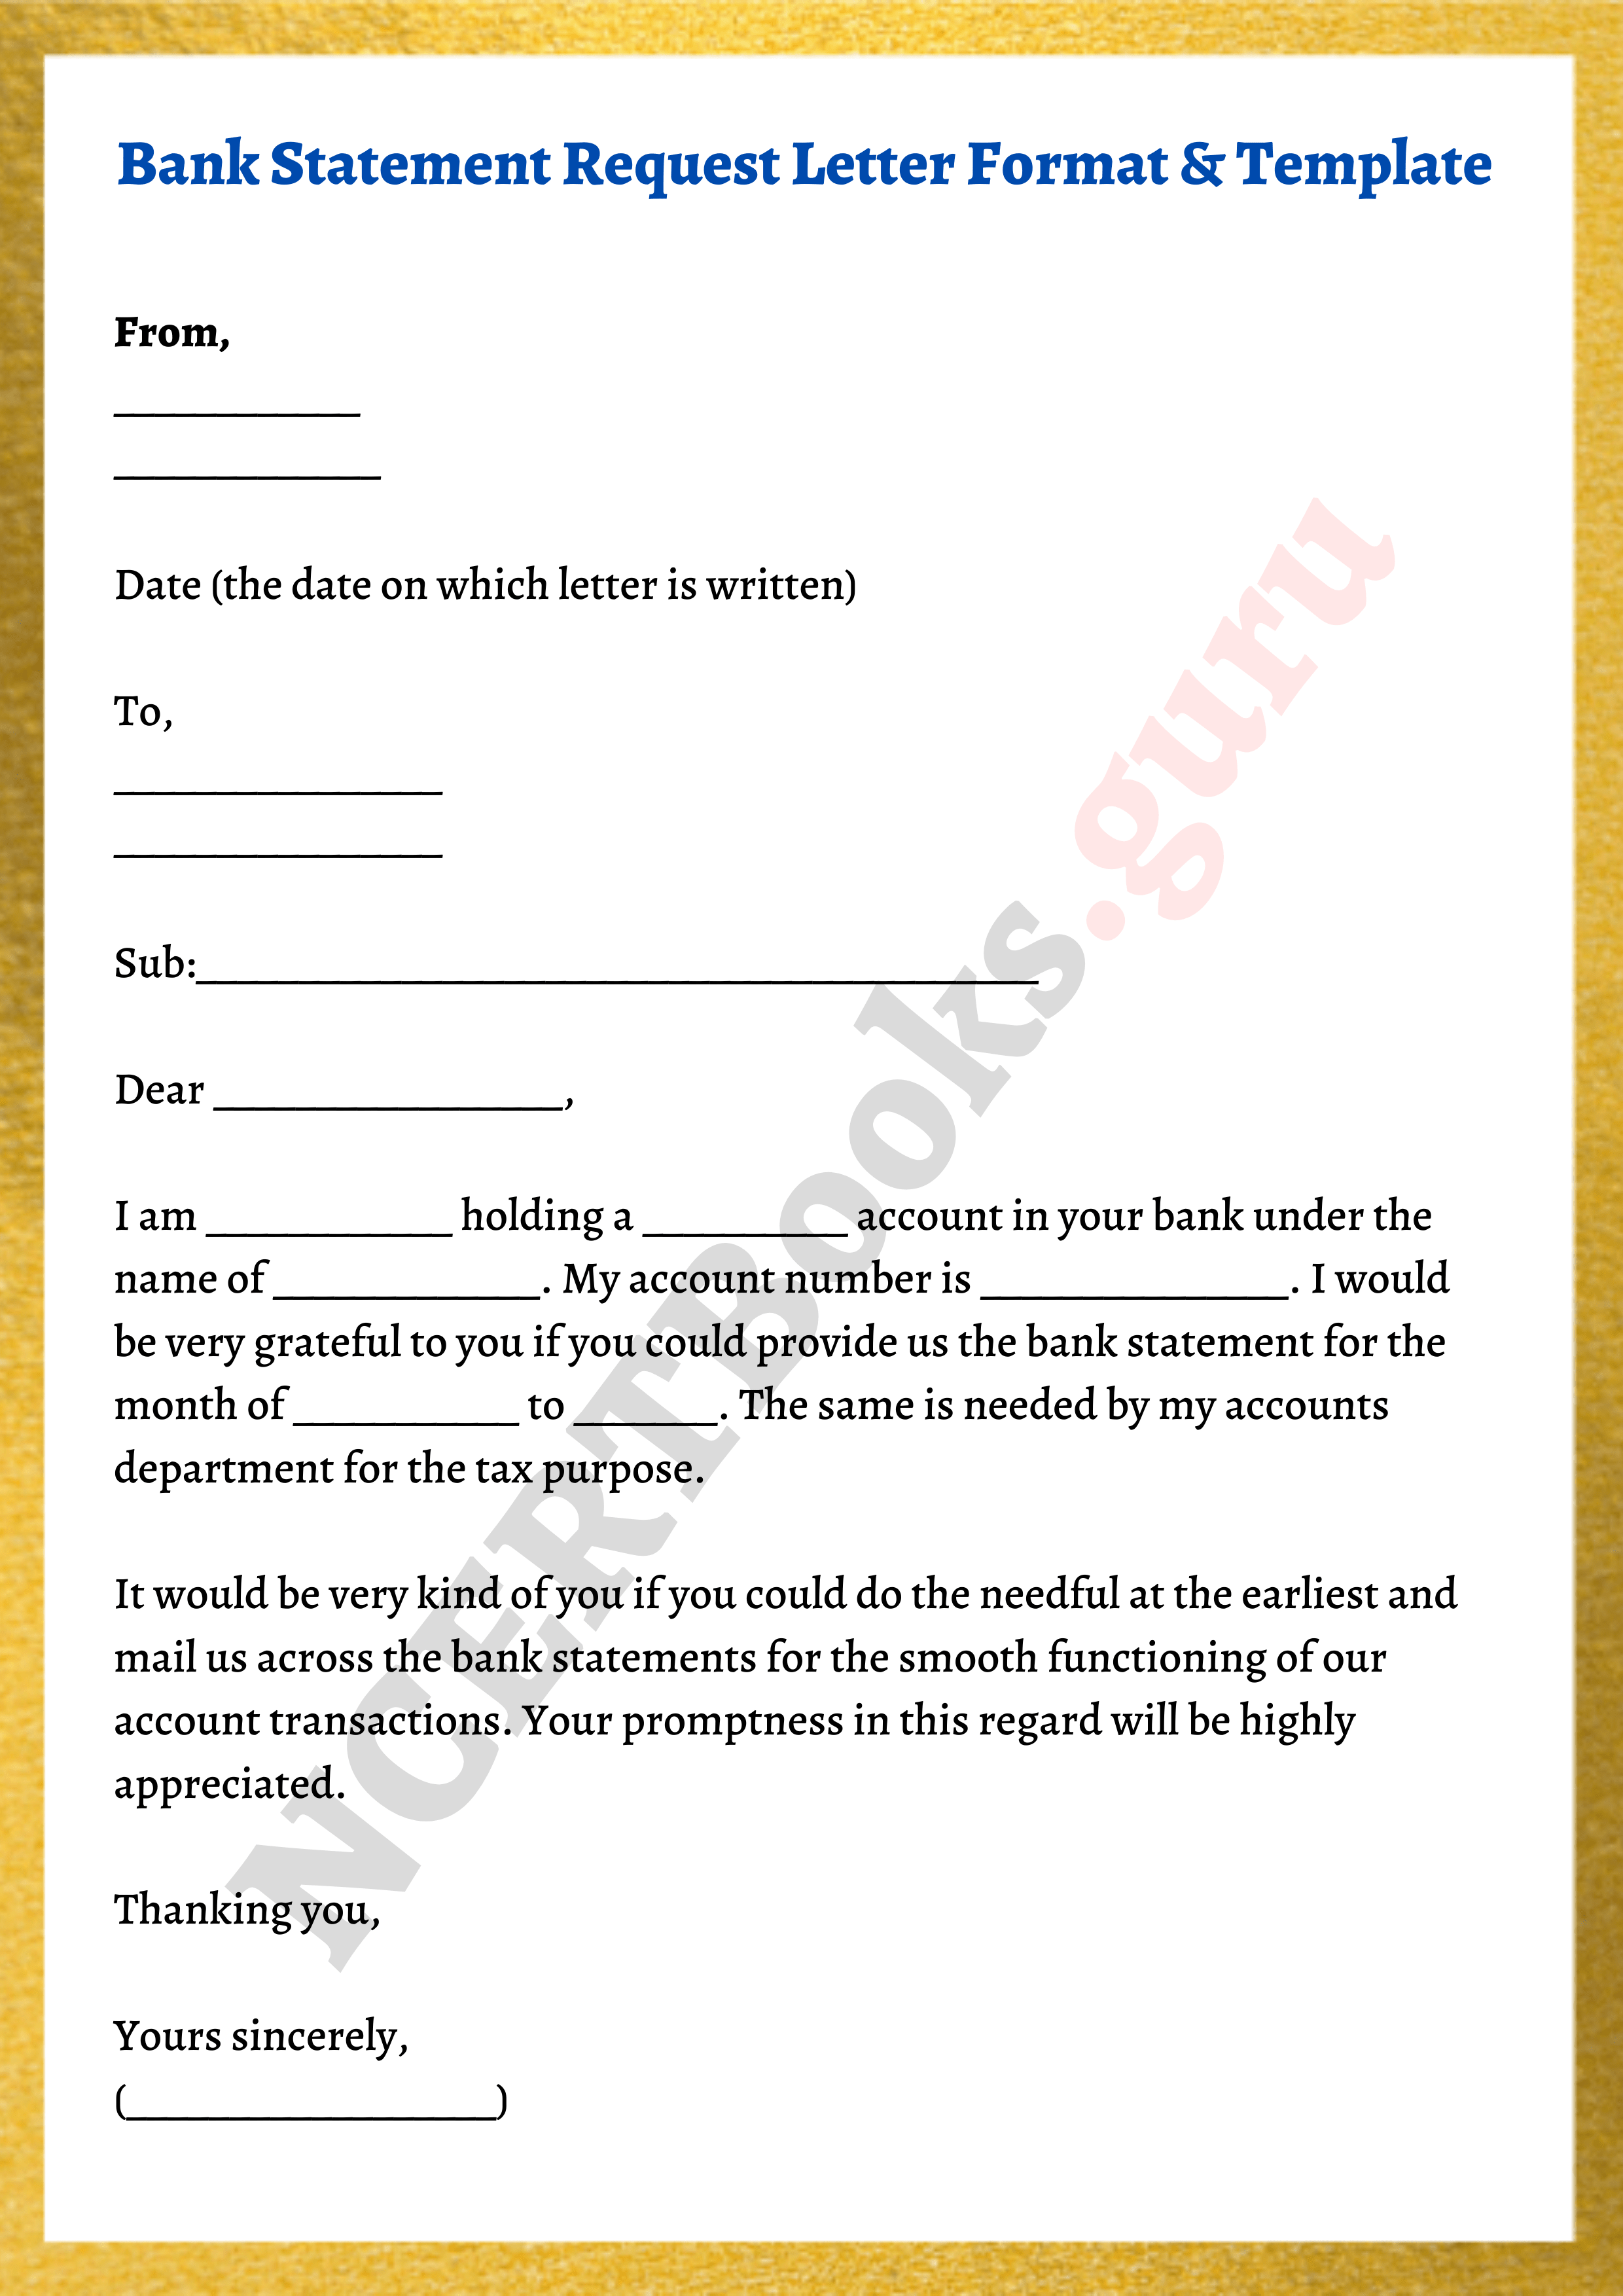 letter-template-to-bank-free-download